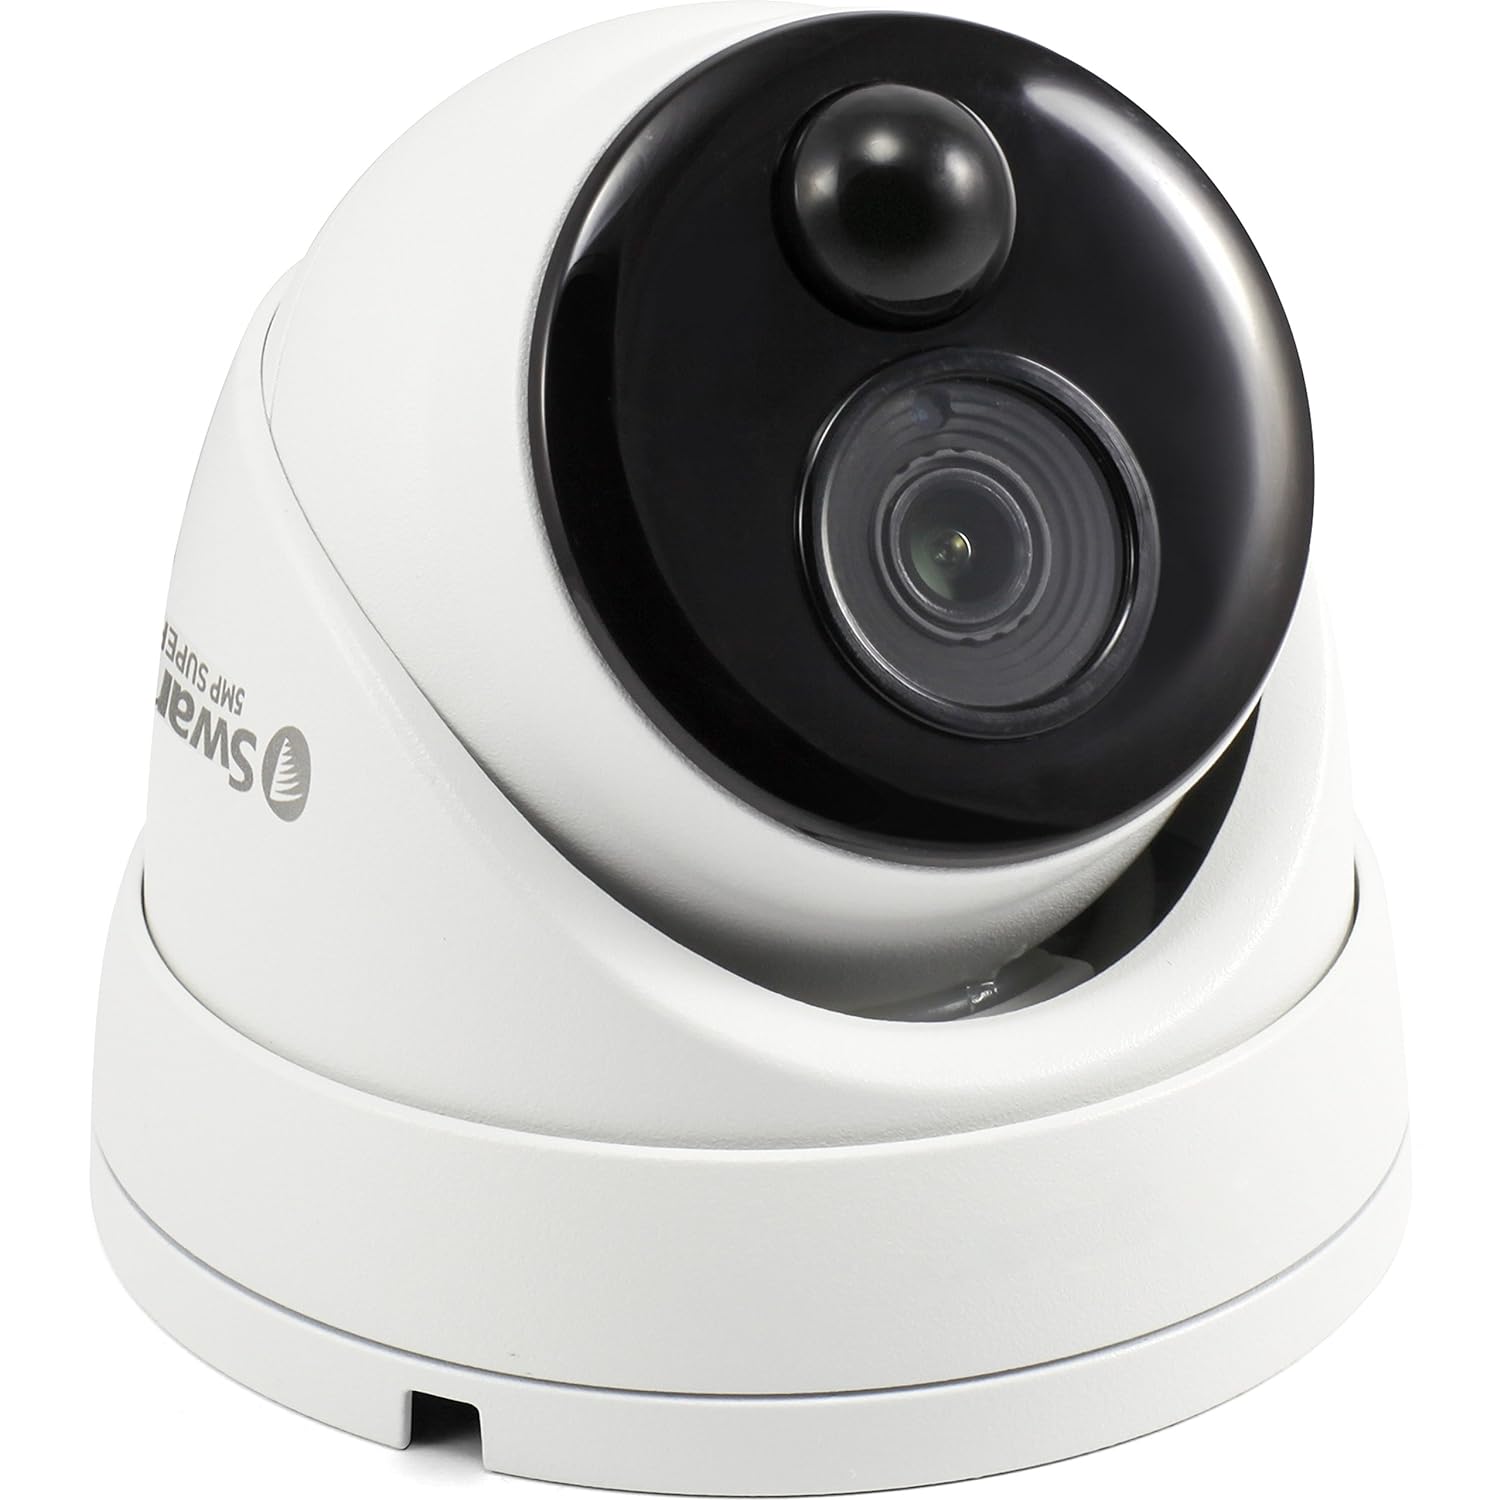 Swann SWPRO-5MPMSD-US 5MP PIR Motion Sensor and 100' of Night Vision Add-On Dome Camera, White